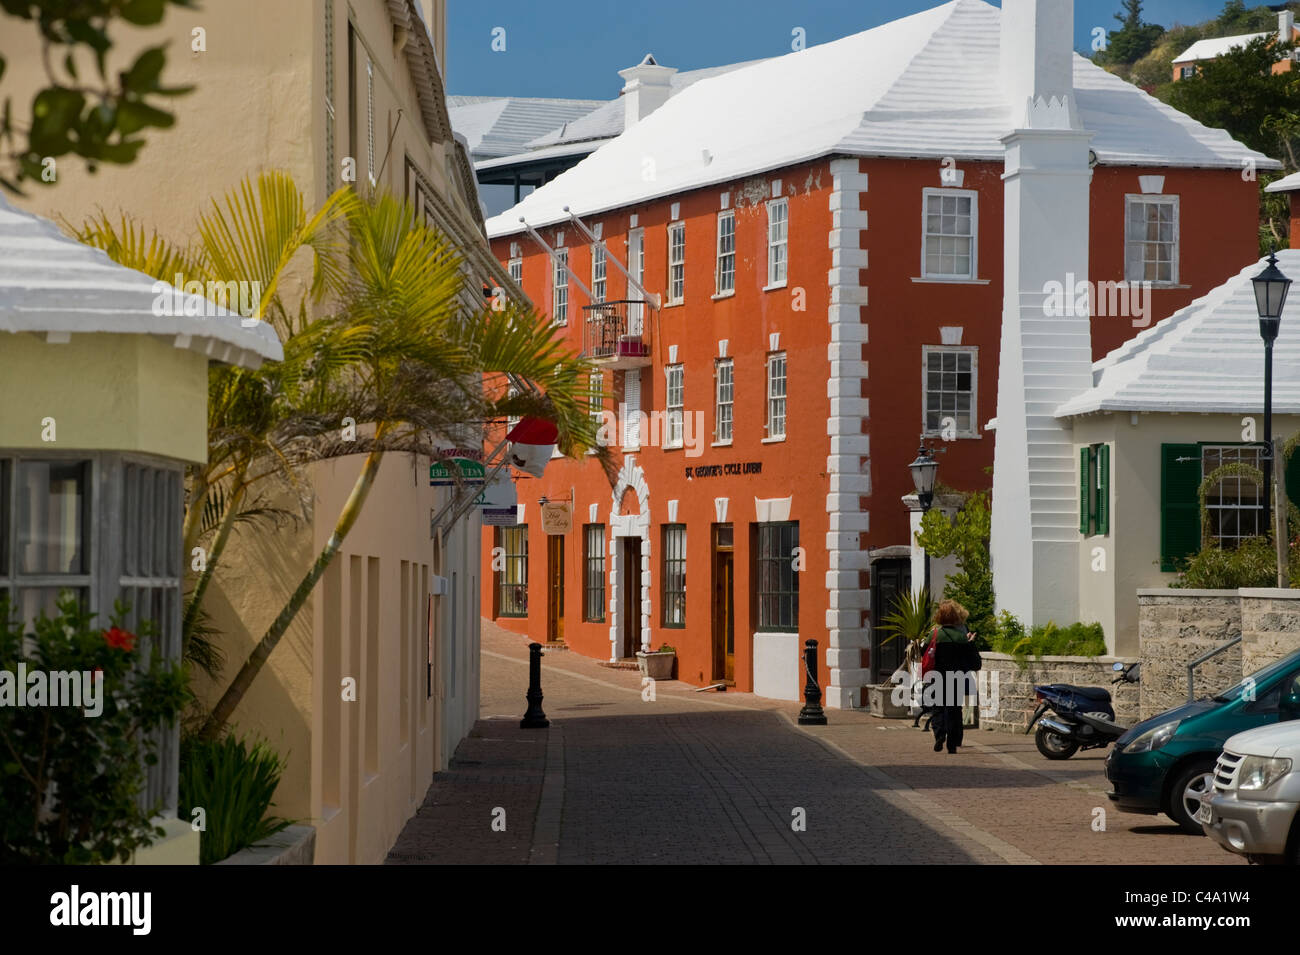 Historical streets of St. George, Bermuda Stock Photo